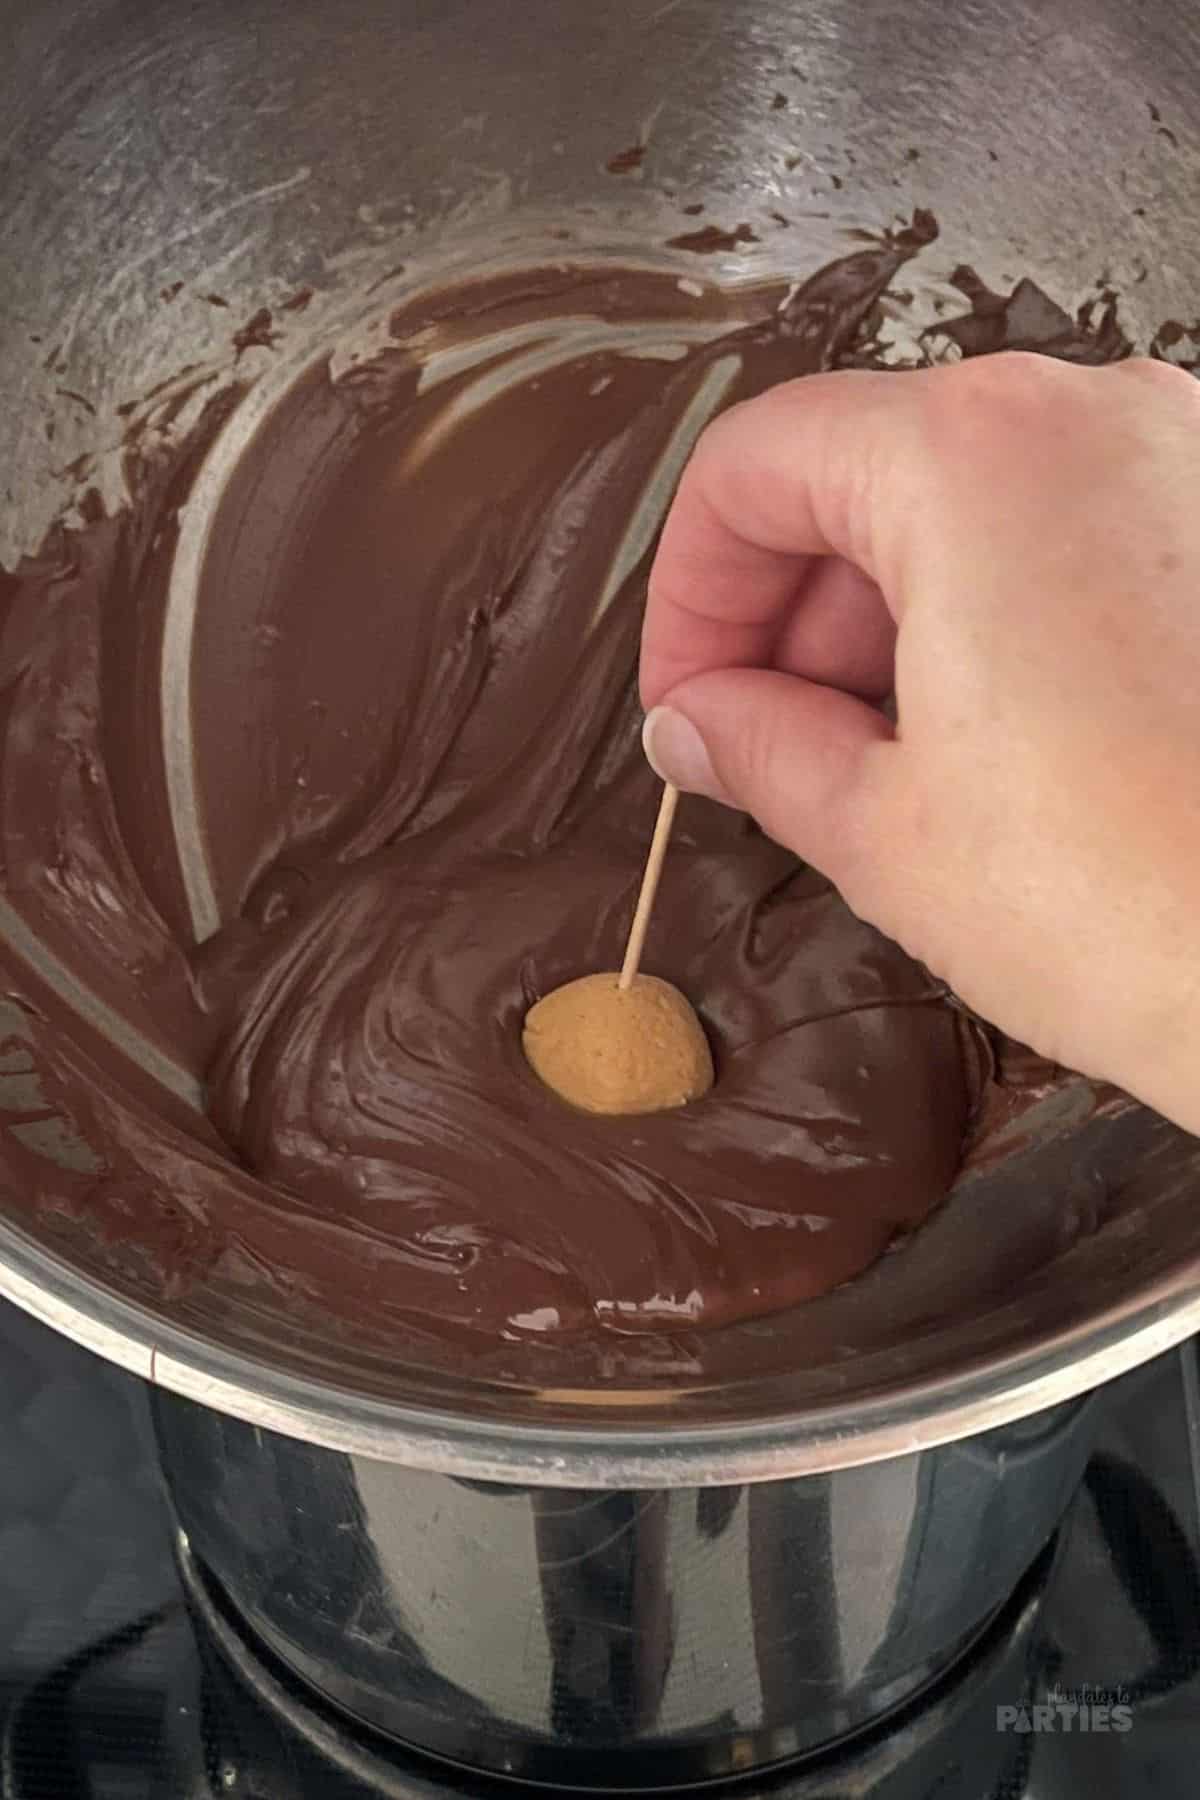 Dipping candy in melted chocolate to coat.